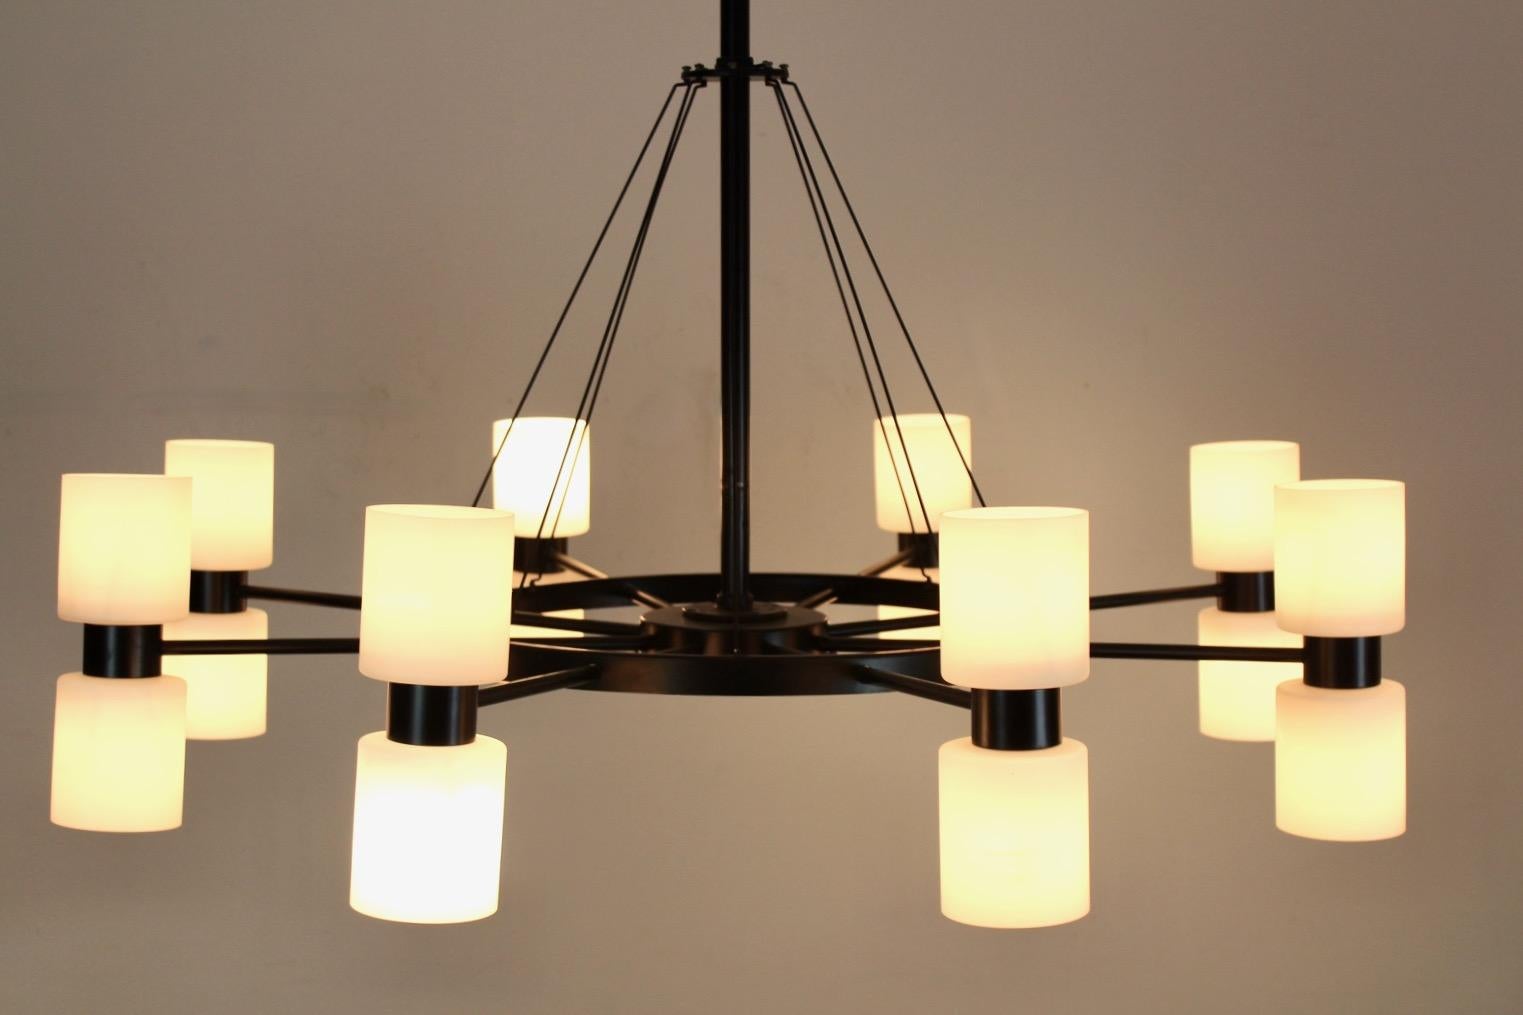 Exceptional 16-Light Chandelier 'Zonnewende' by J.W. Bosman for RAAK Amsterdam For Sale 3